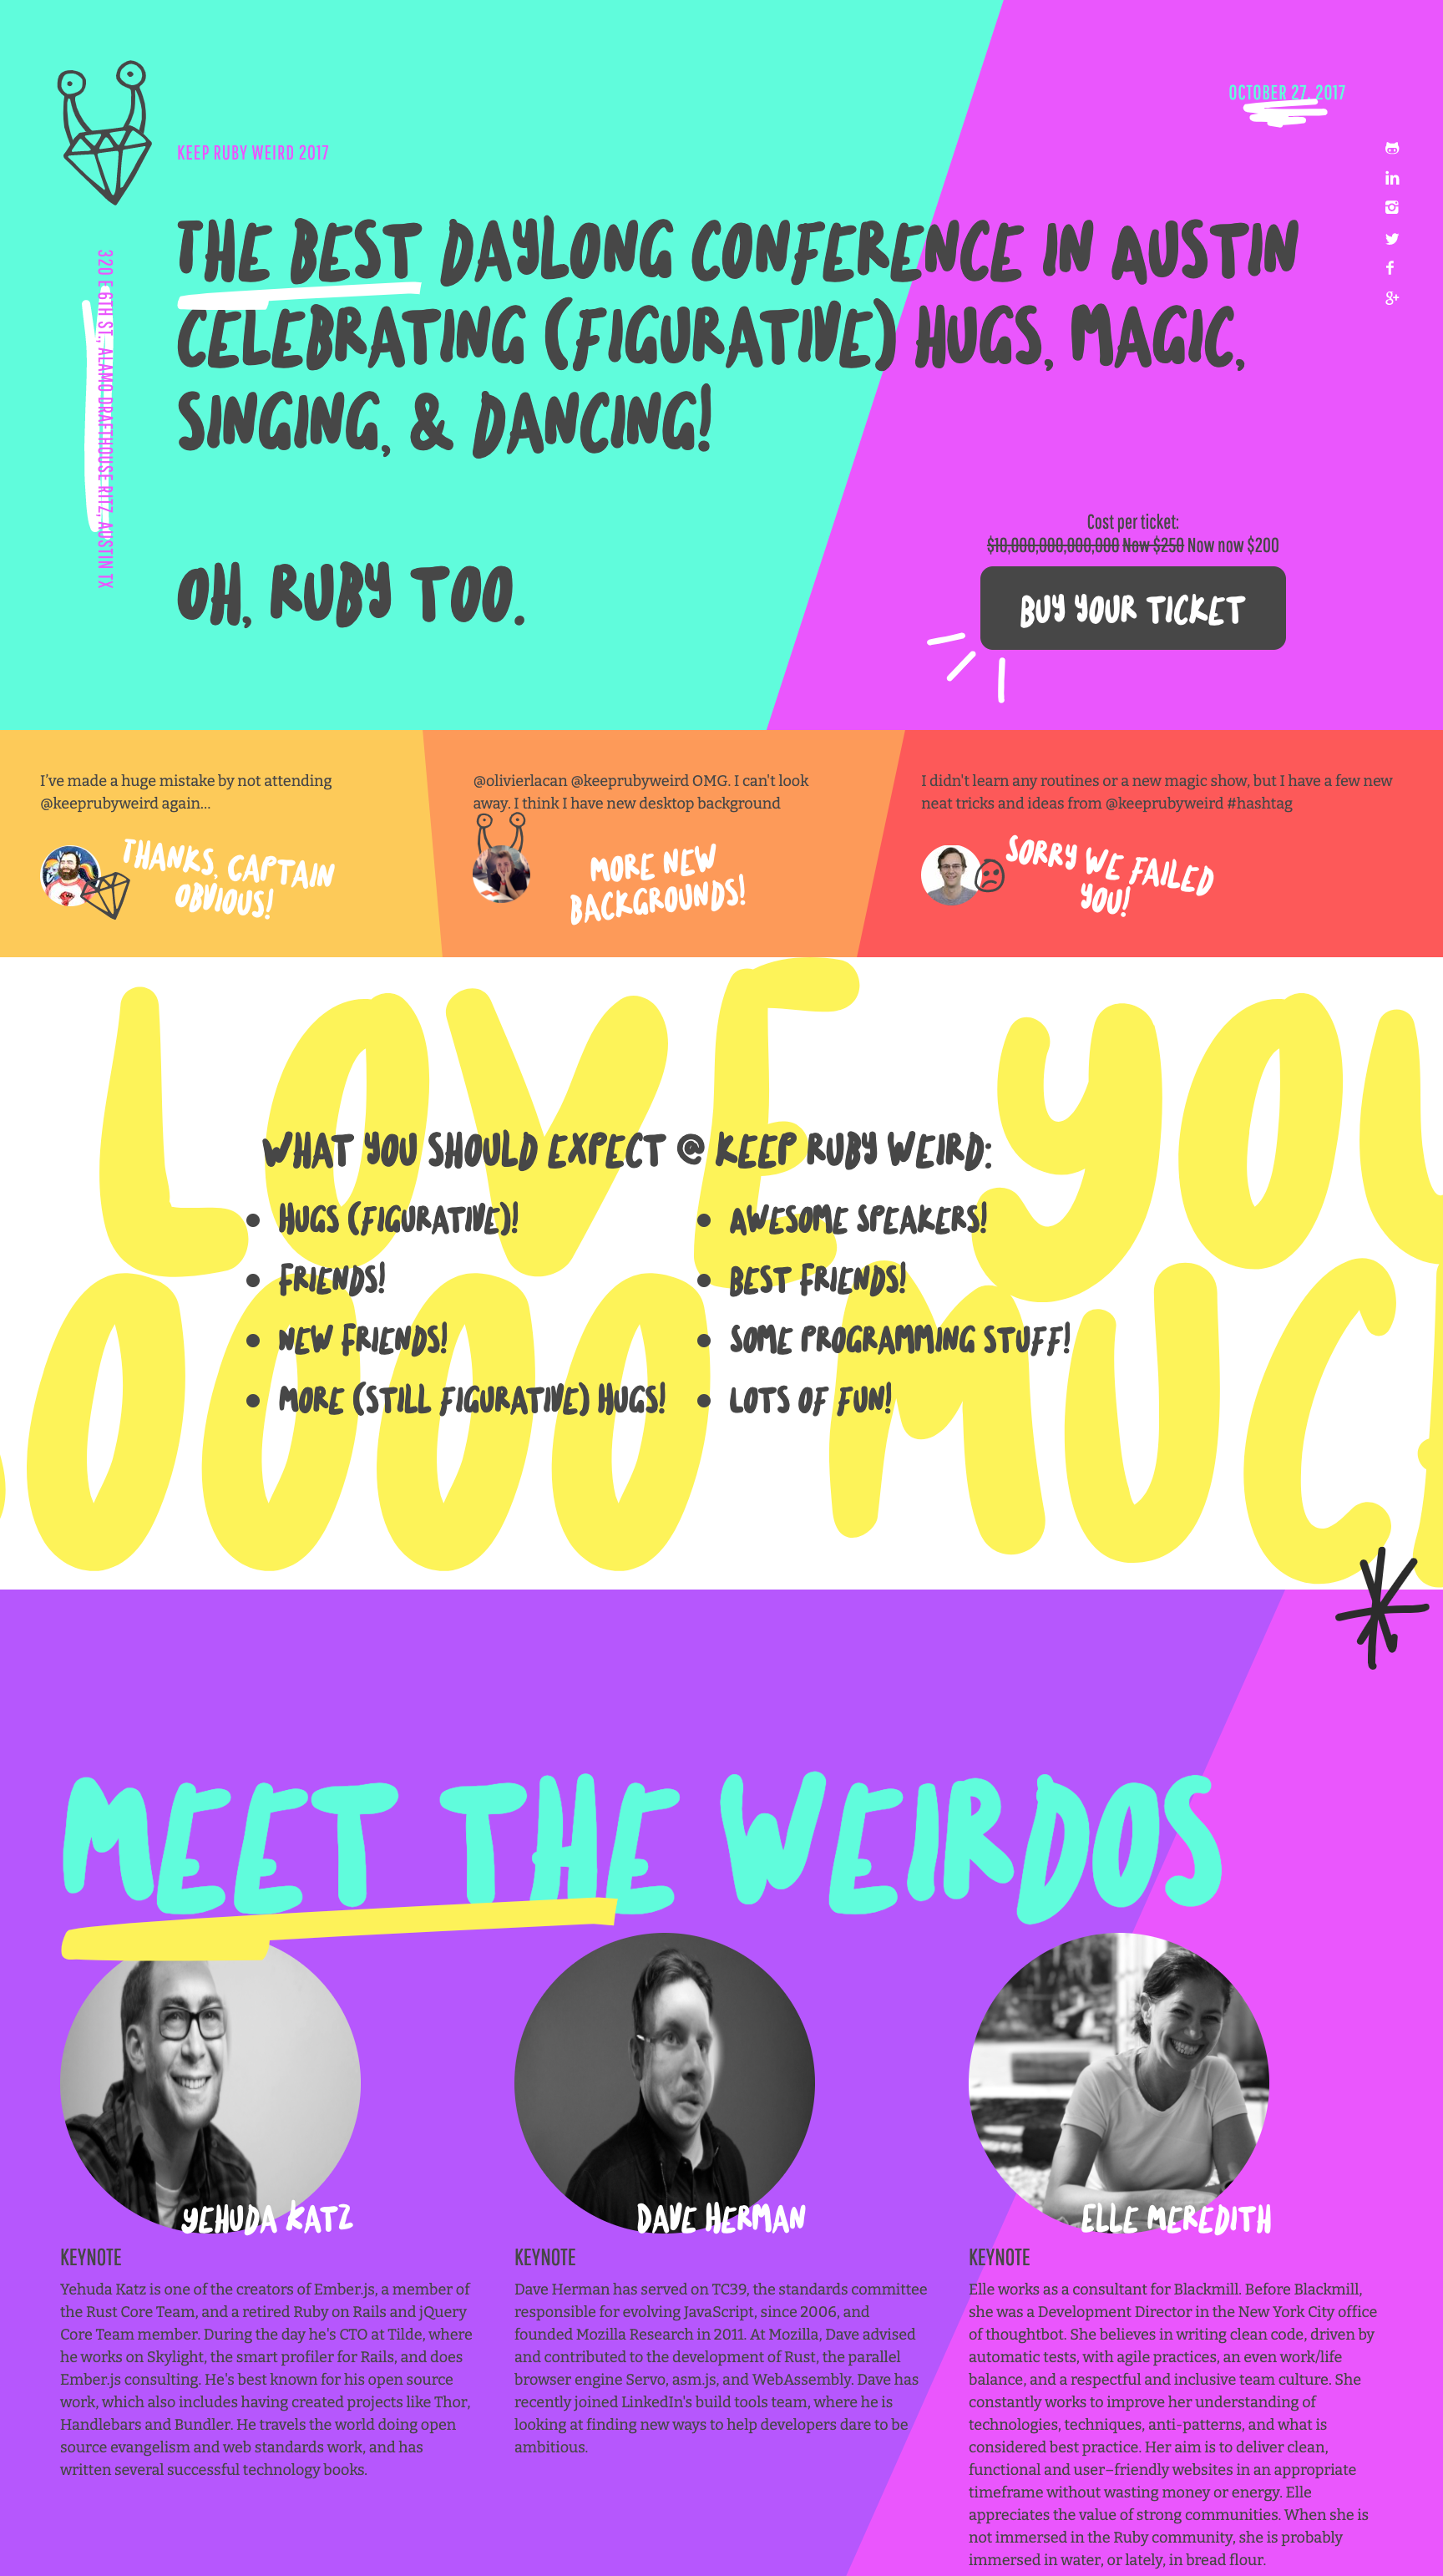 A screenshot of the hero section of the 2017 Keep Ruby Weird site